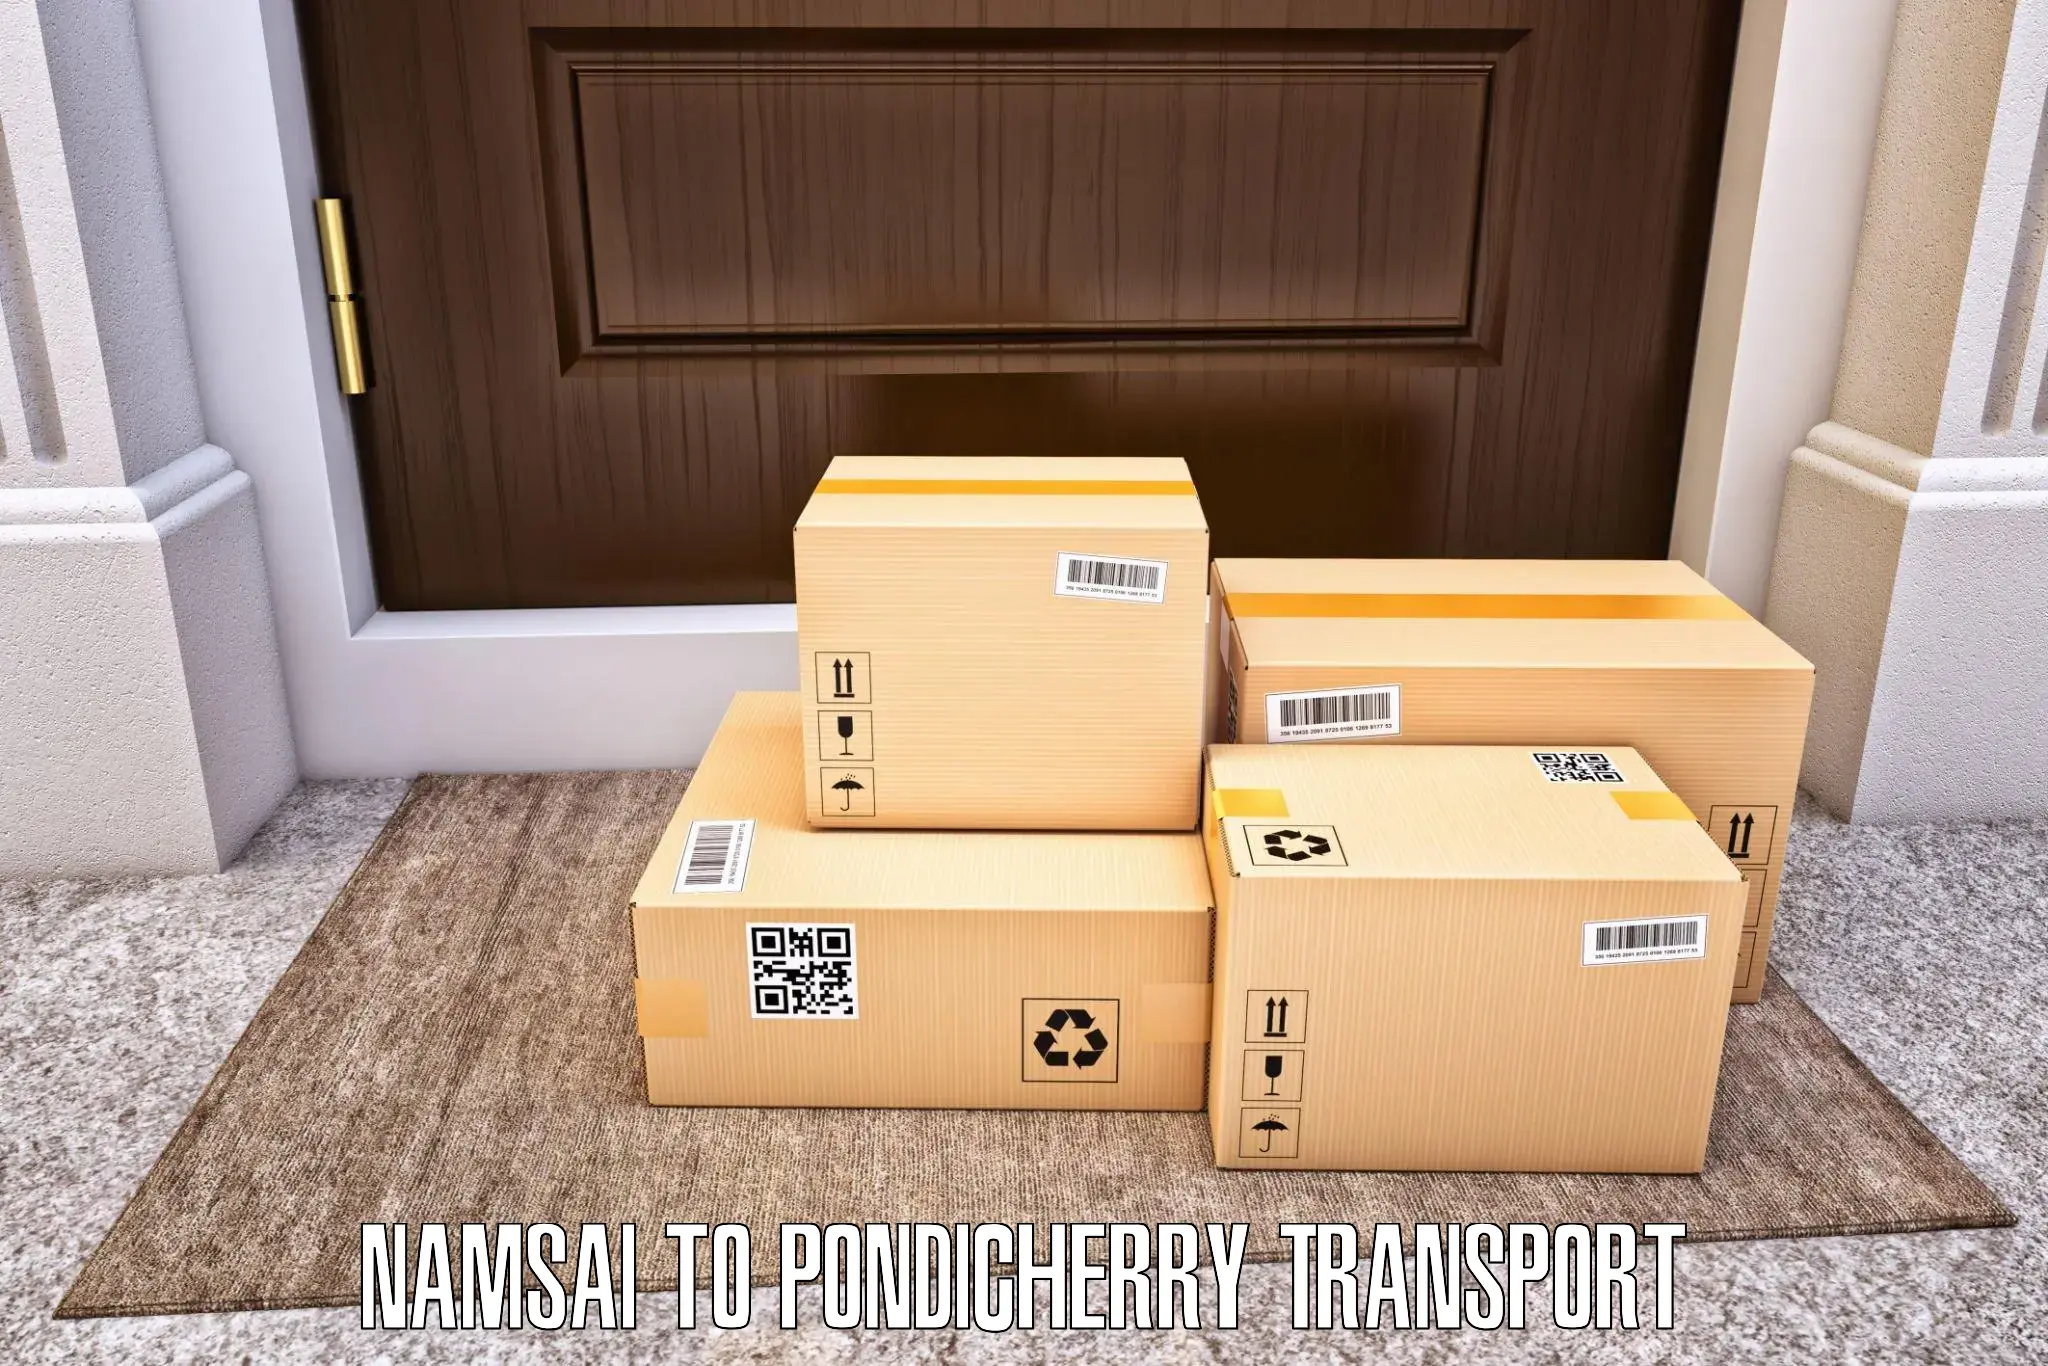 Part load transport service in India Namsai to Pondicherry